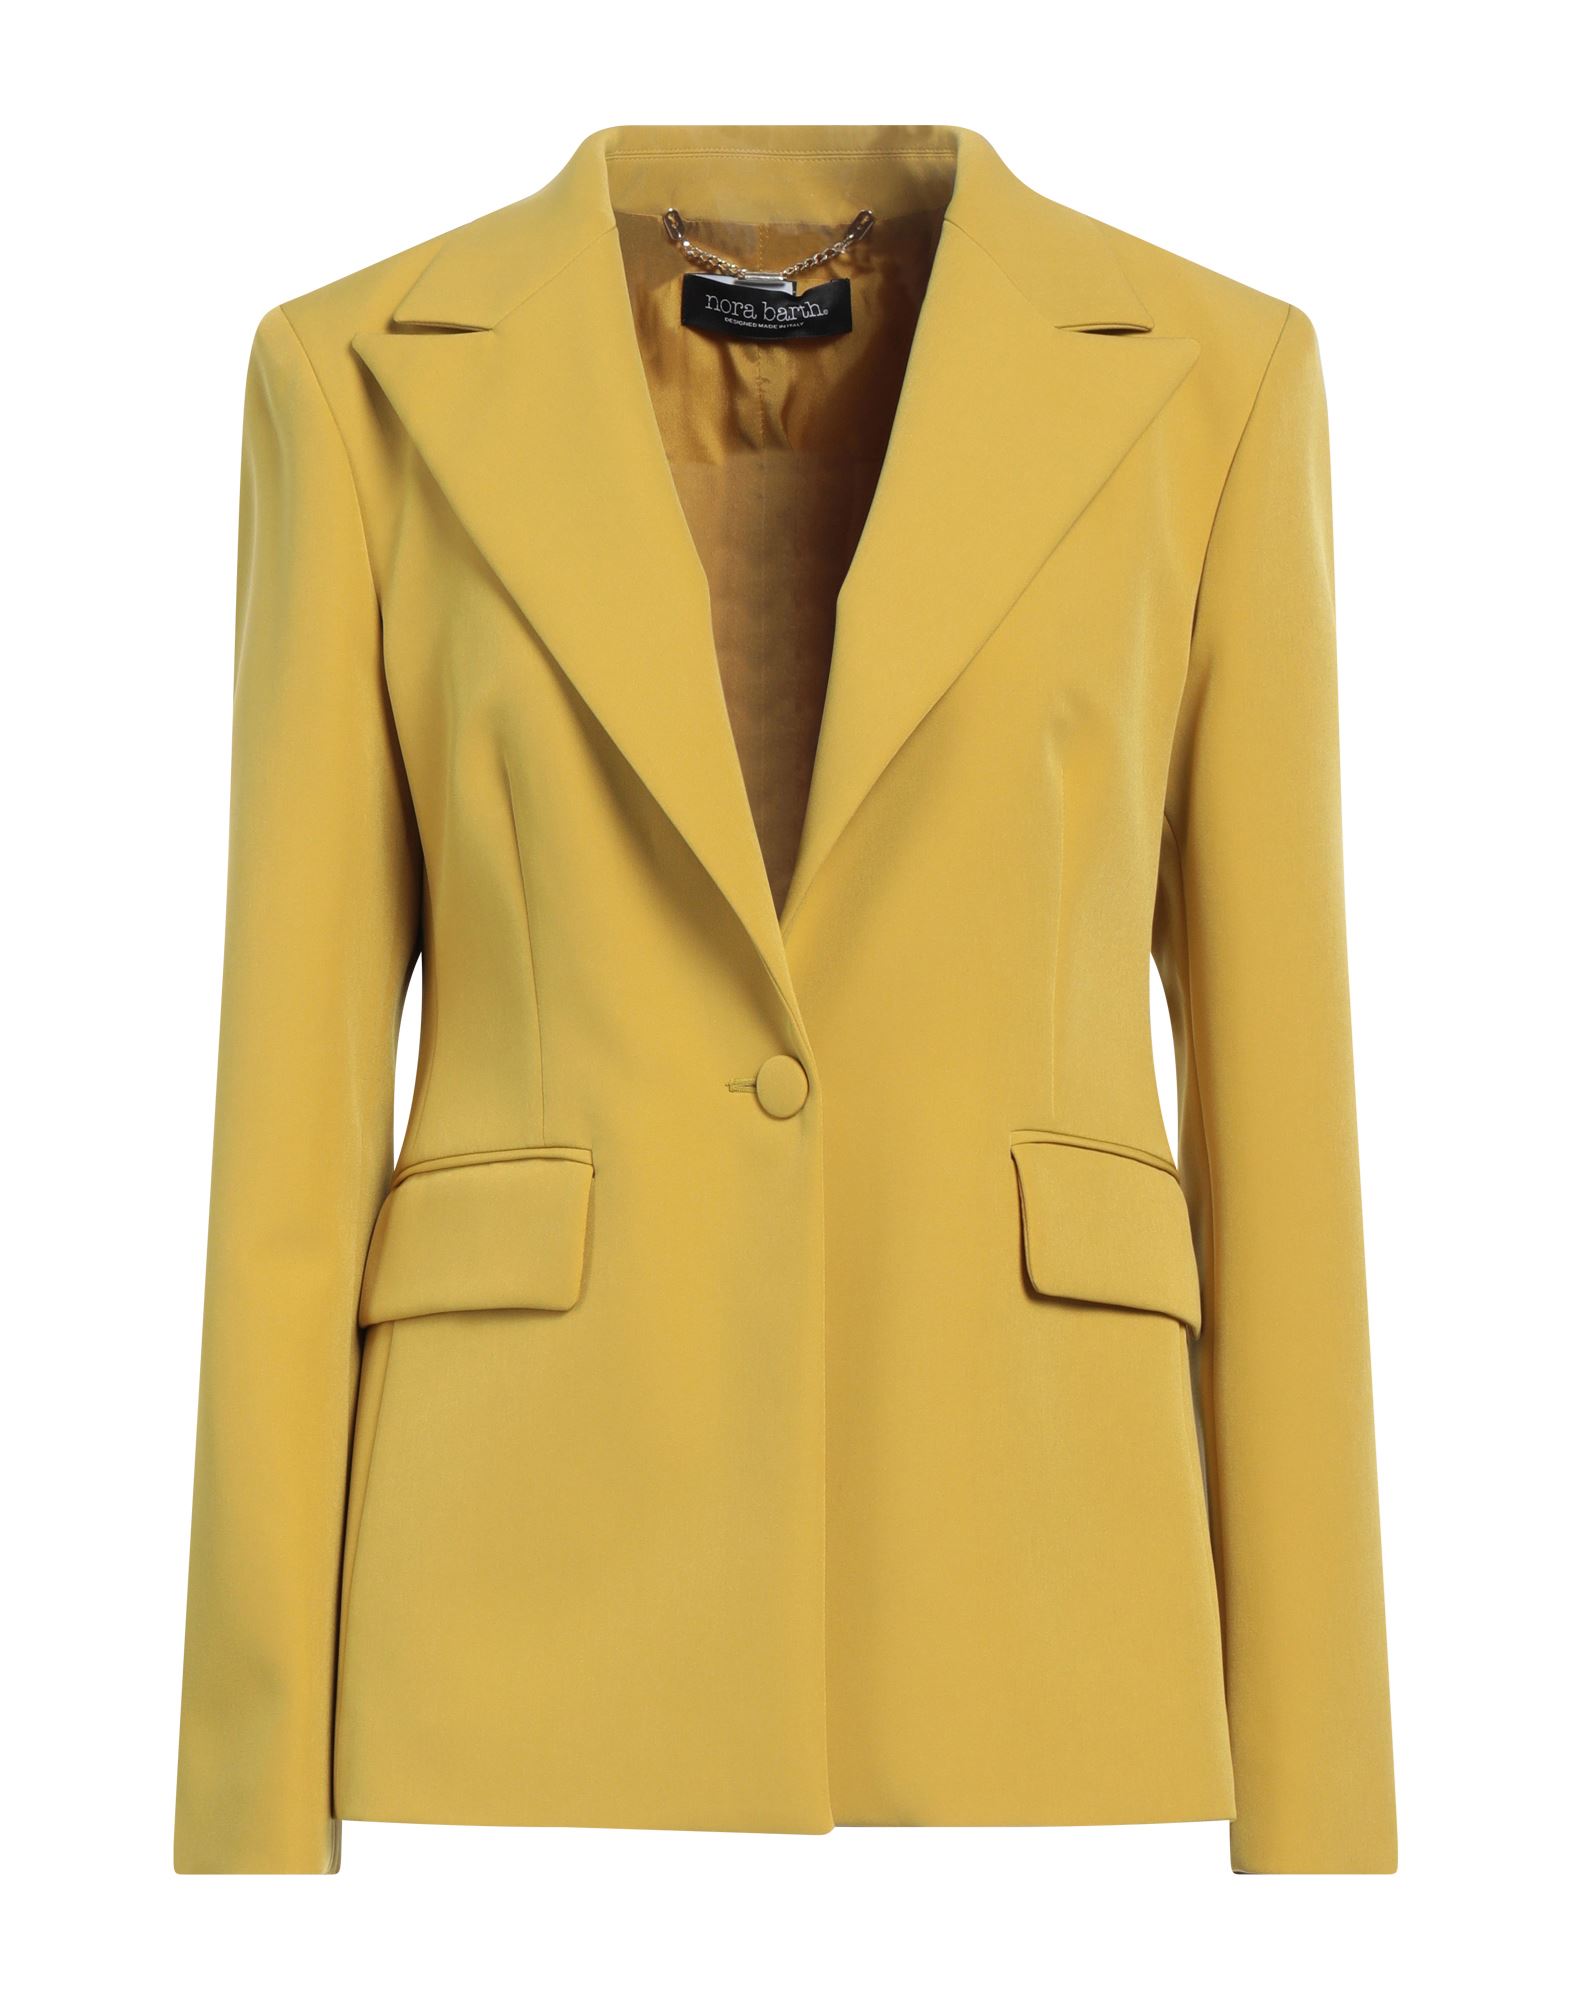 Nora Barth Suit Jackets In Yellow